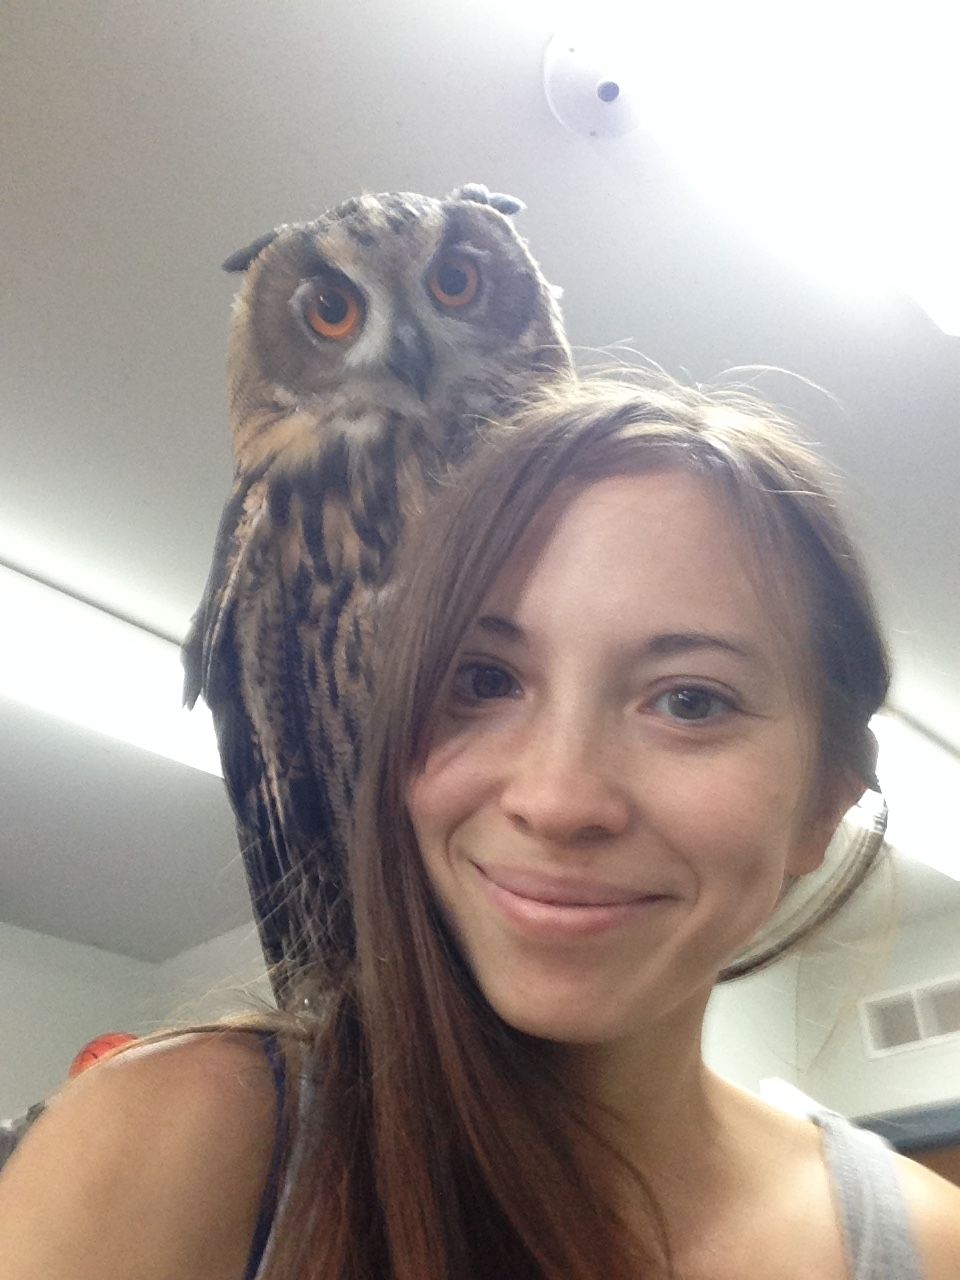 Amanda with a young owl during a volunteer session at an animal rescue.